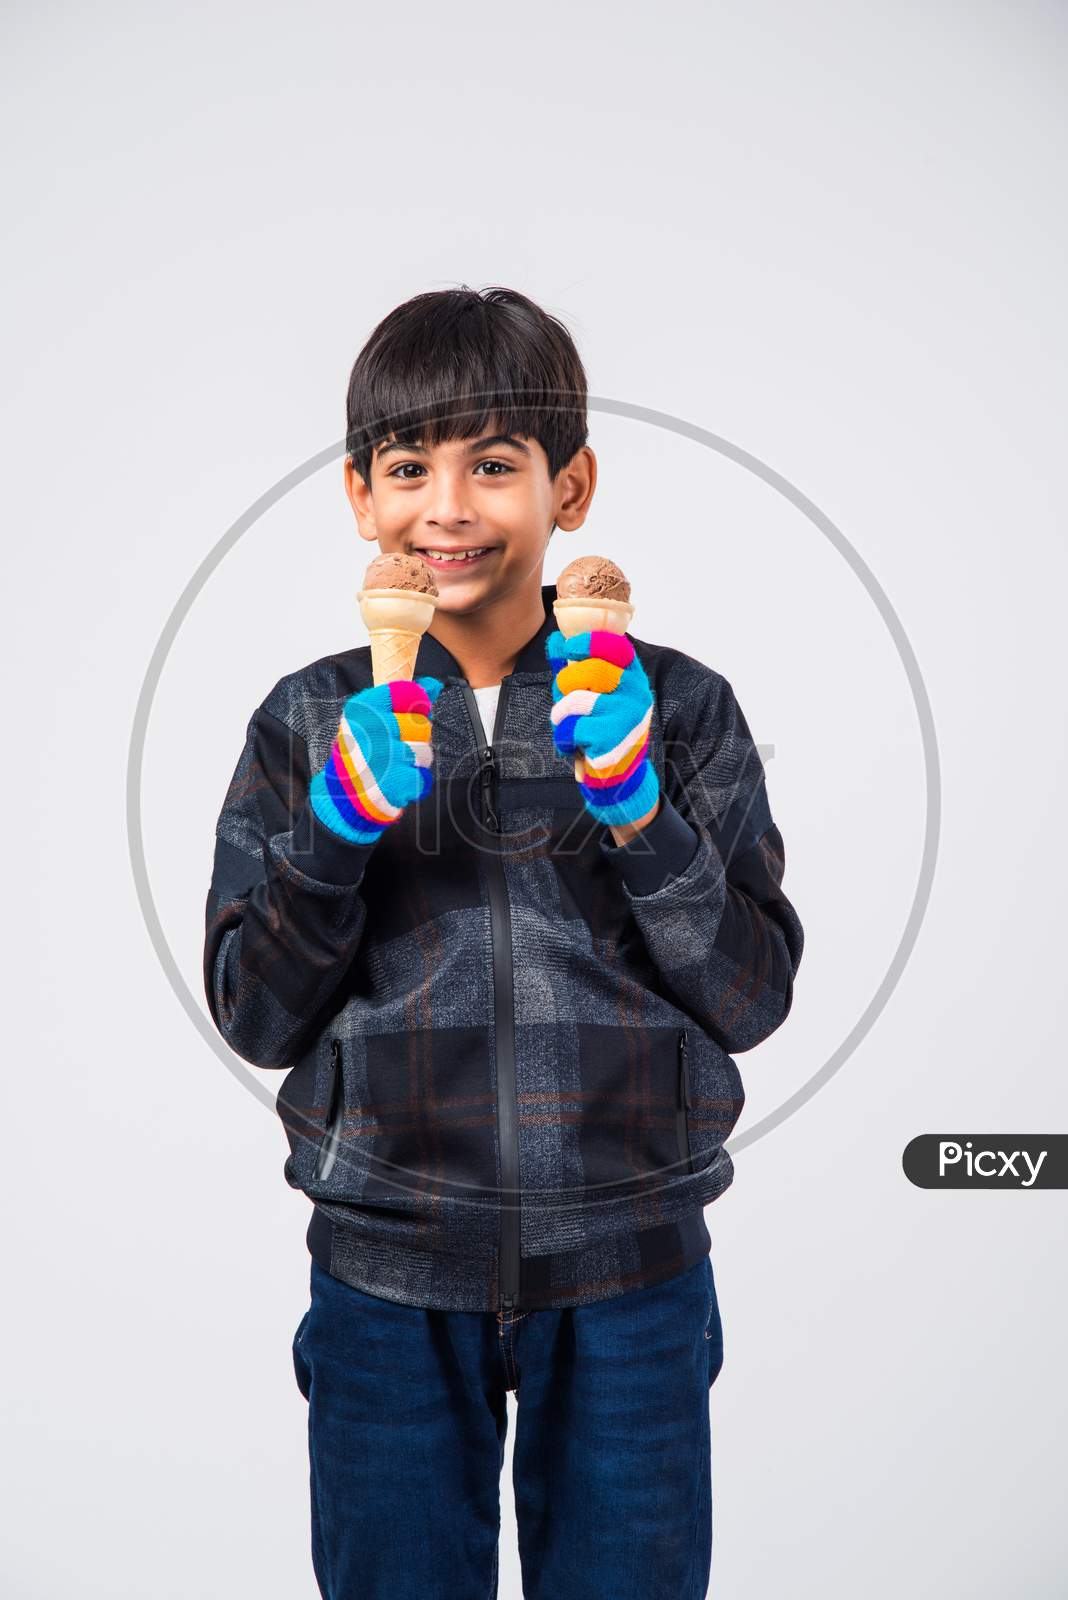 Indian kid / boy eating ice cream in warm clothes on white background